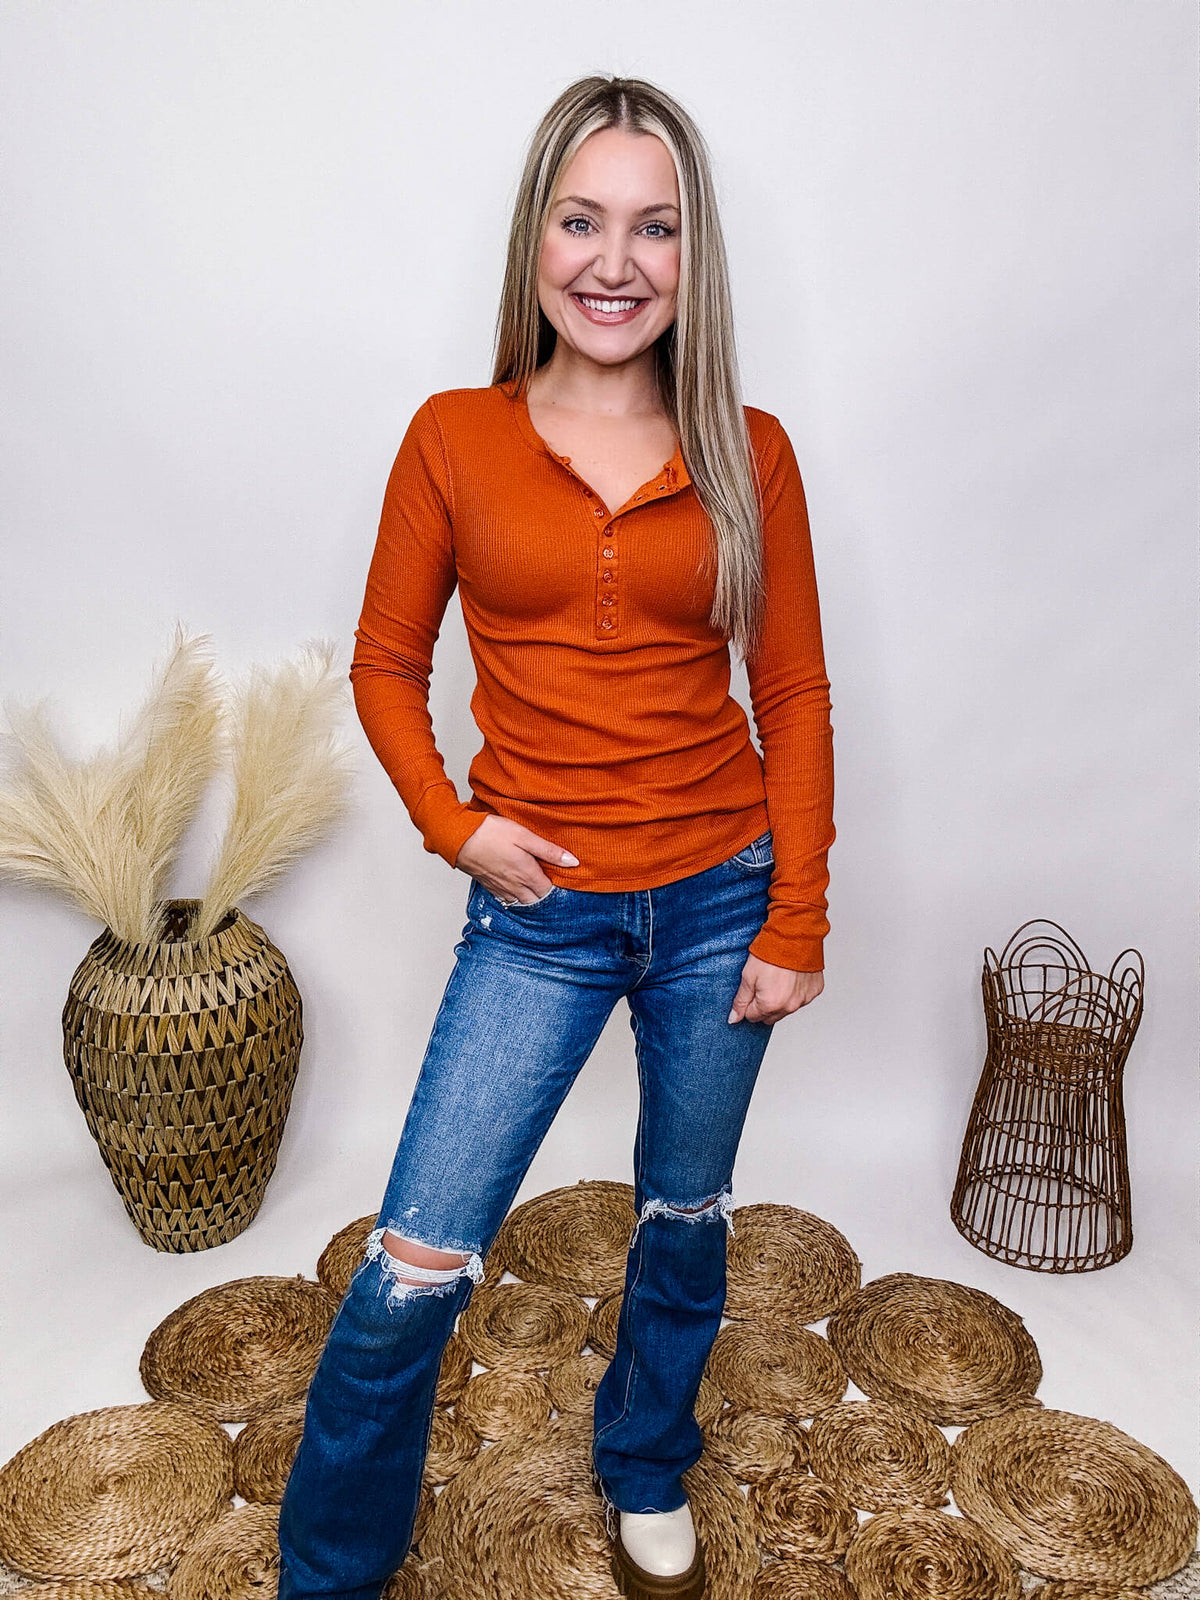 Active Basic Orange Henley Button Up Thermal Long Sleeve Top Stretchy and Fitted 58% Cotton, 39% Polyester, 3% Spandex